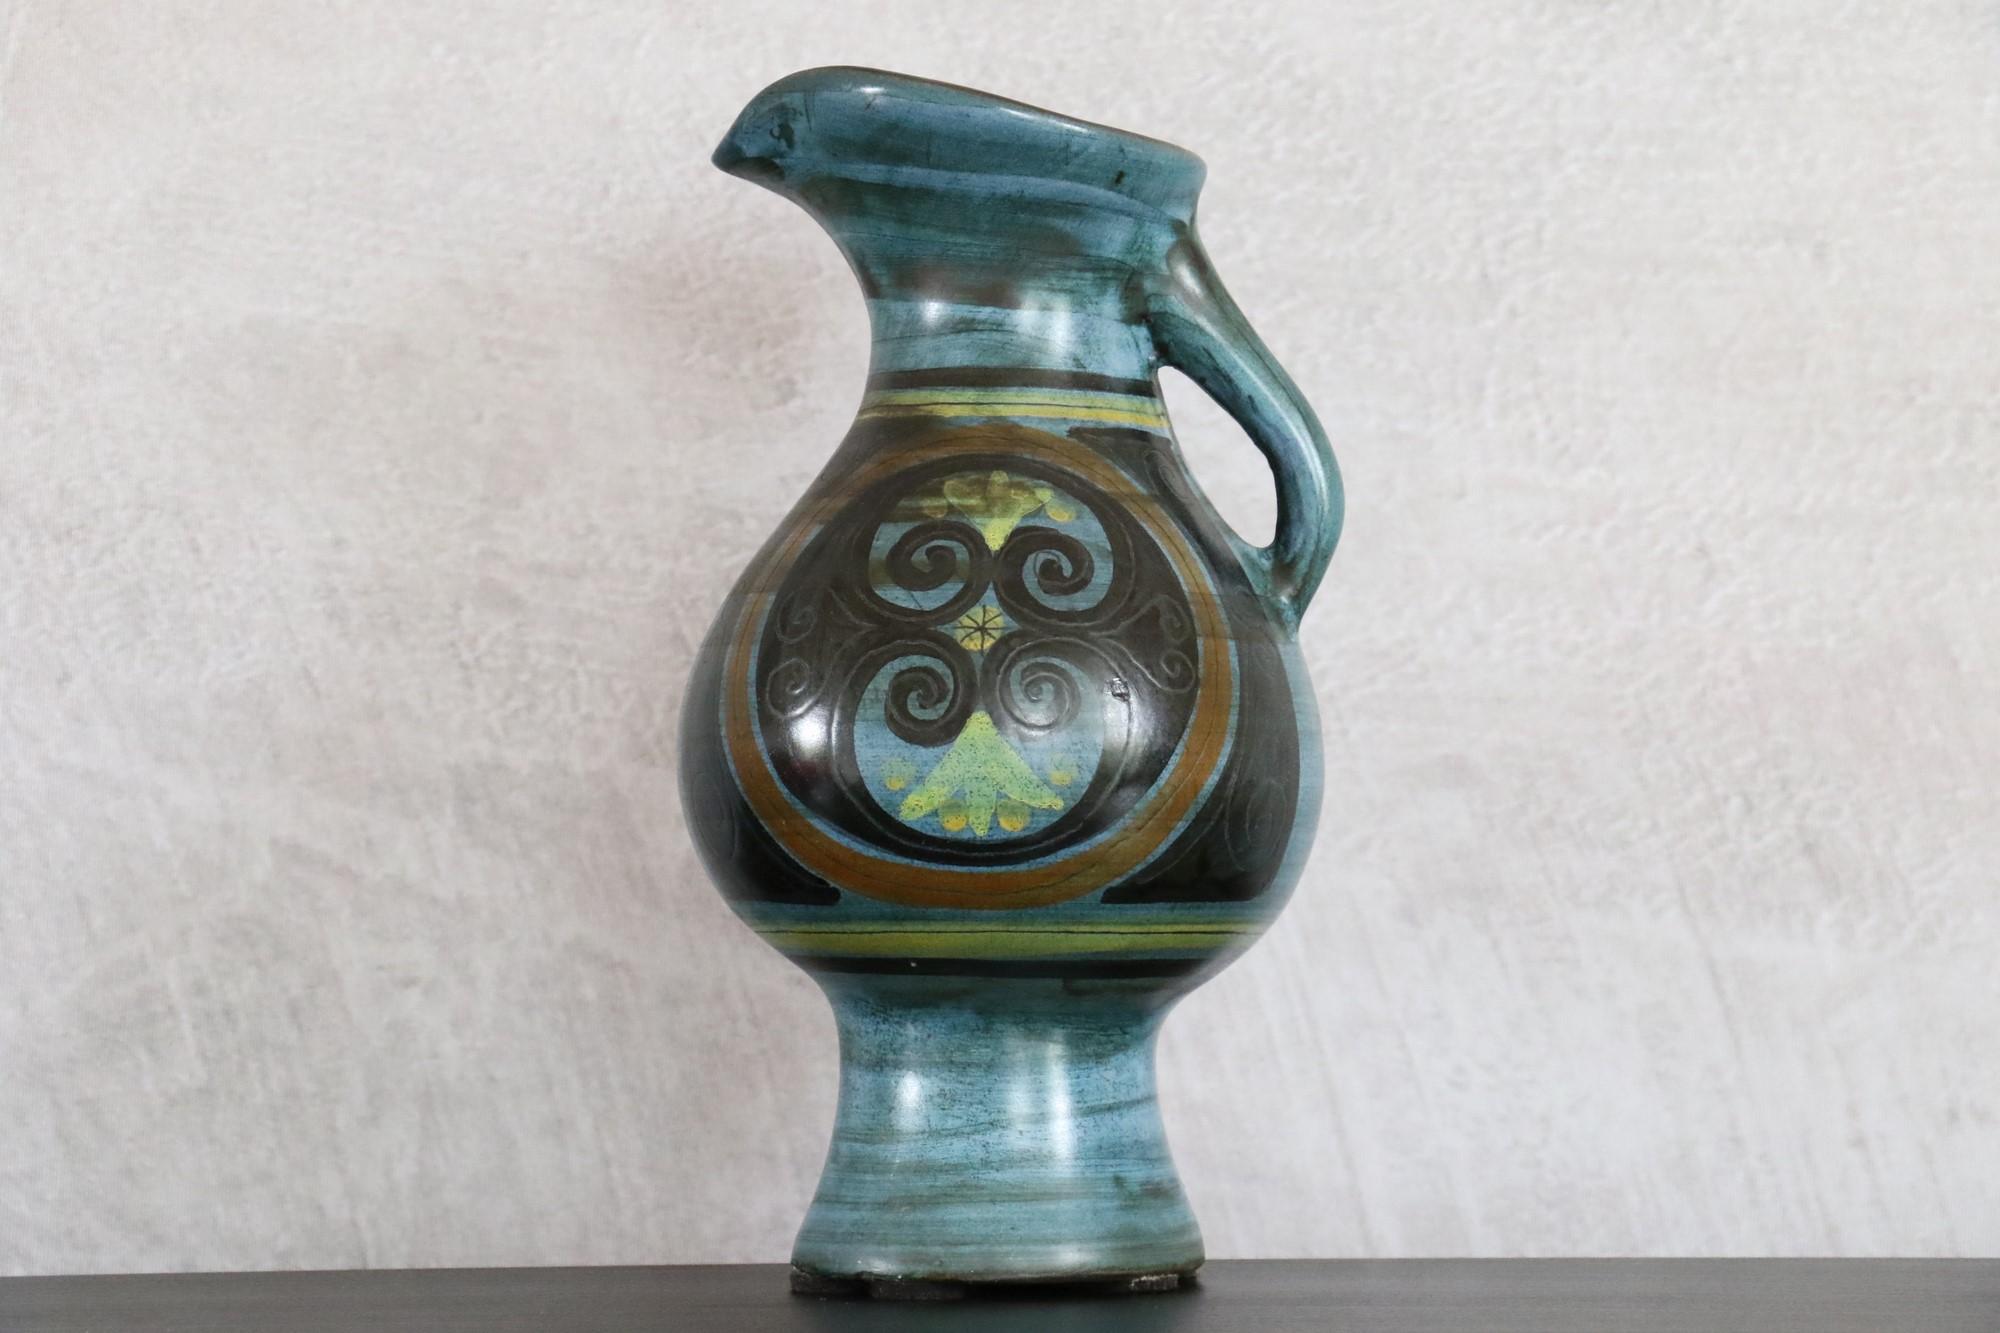 Ceramic Pitcher by Jean de Lespinasse, signed, circa 1960, Volutes Decoration

The dominant colour is blue. It is a very beautiful glaze with a silky appearance and a delicate touch. The colour is enhanced by diffuse black stripes and a greenish